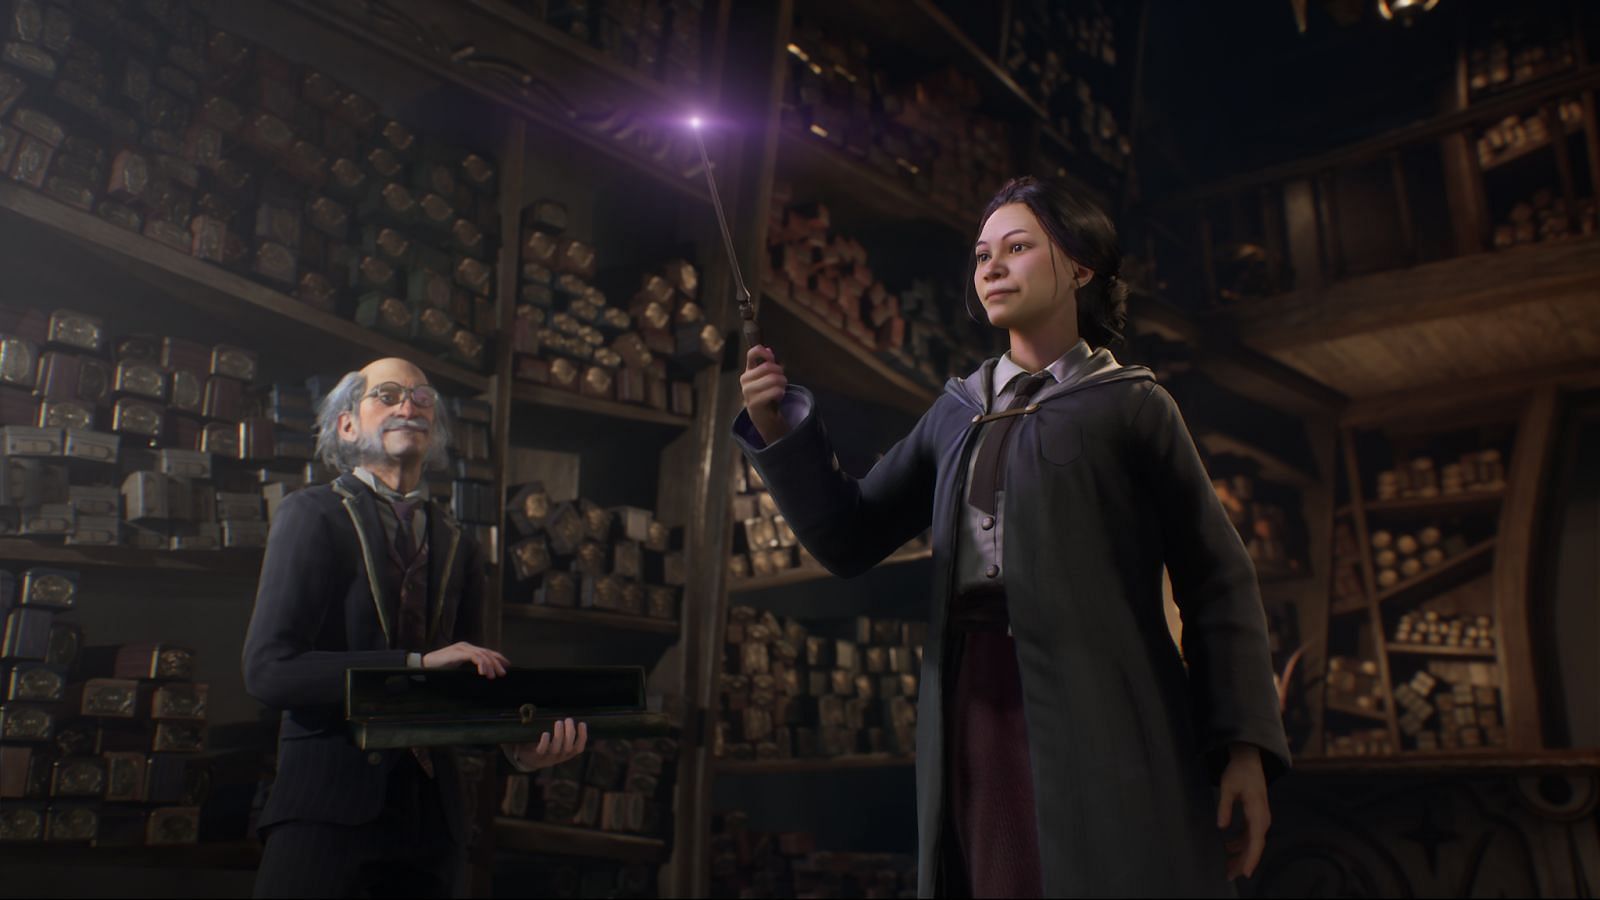 Hogwarts Legacy is set to release in 2022 (Image by WB Games)